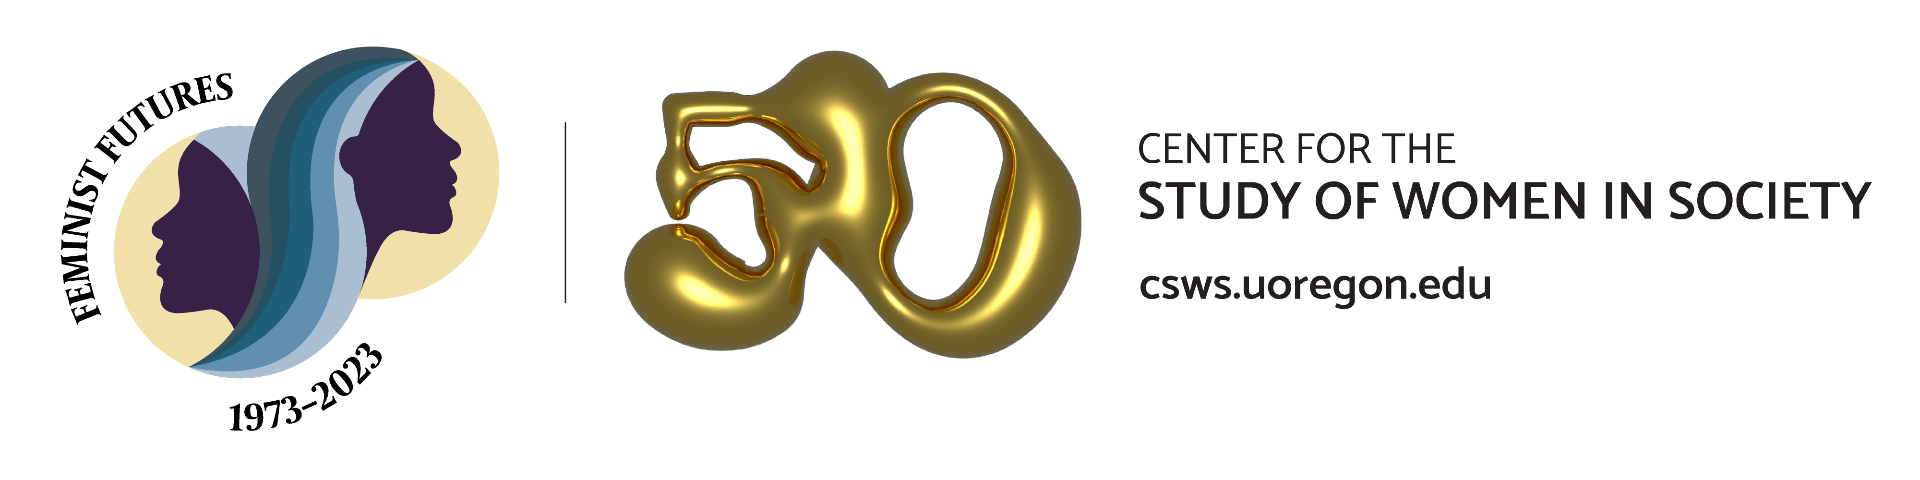 Center for the Study of Women in Society 50th anniversary banner in gold